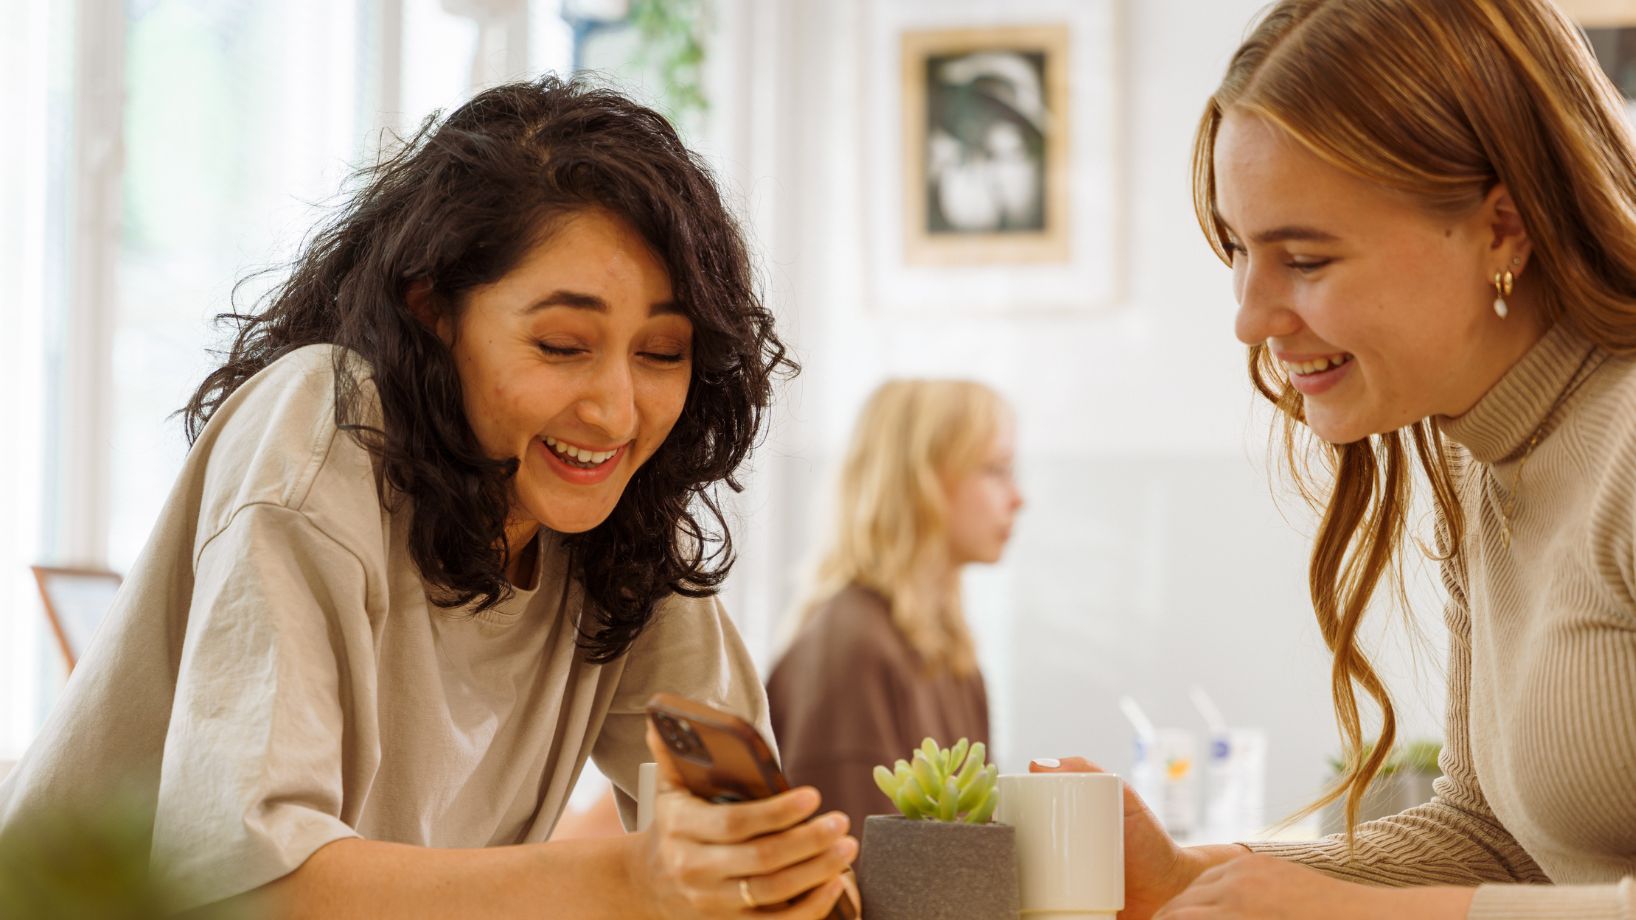 two women sitting at a table in a cafe, looking at something on a phone screen and laughing